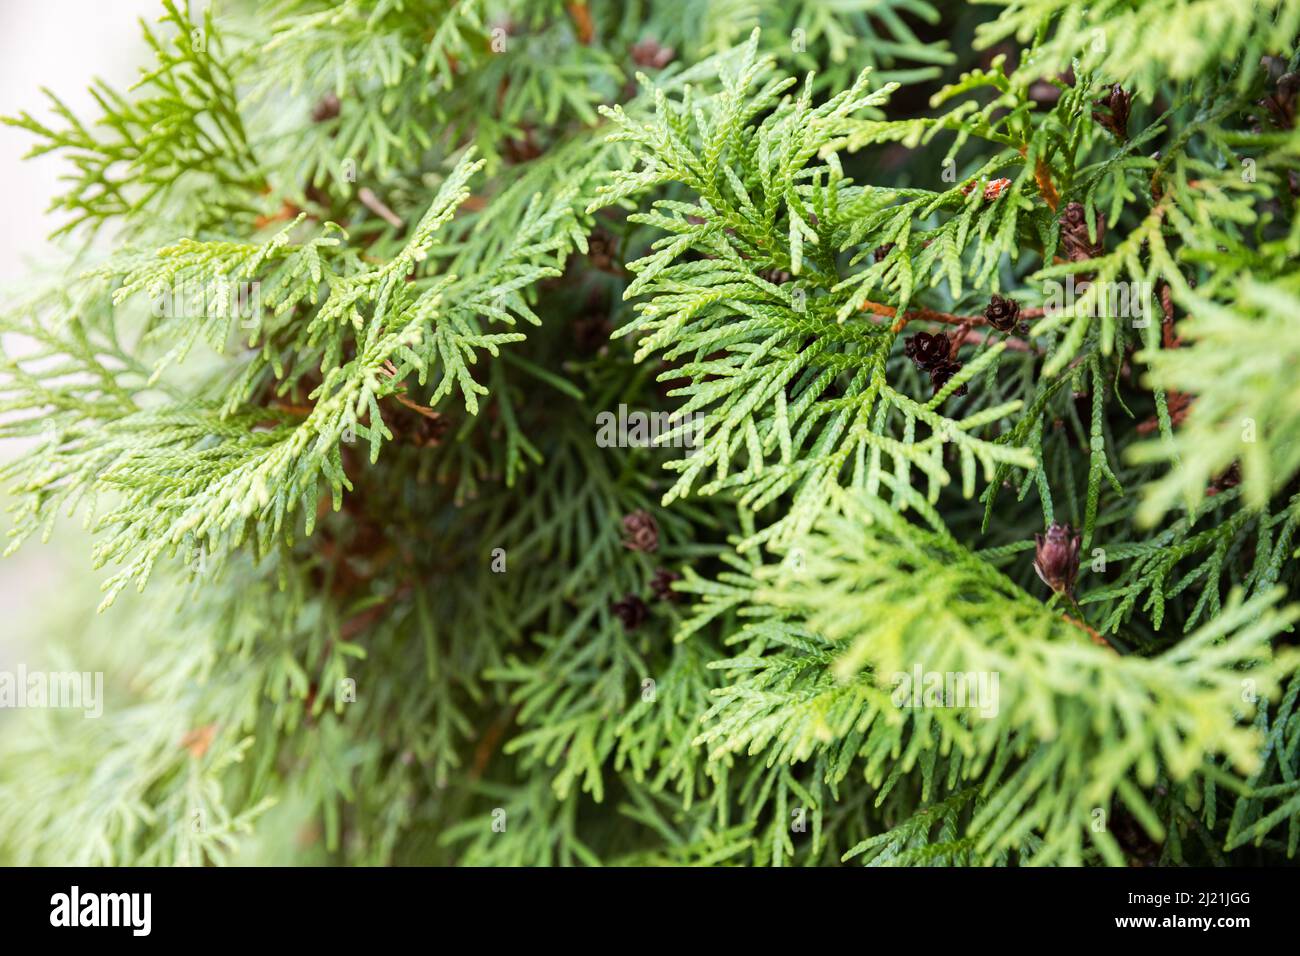 Thuja occidentalis branches with cones close-up Stock Photo